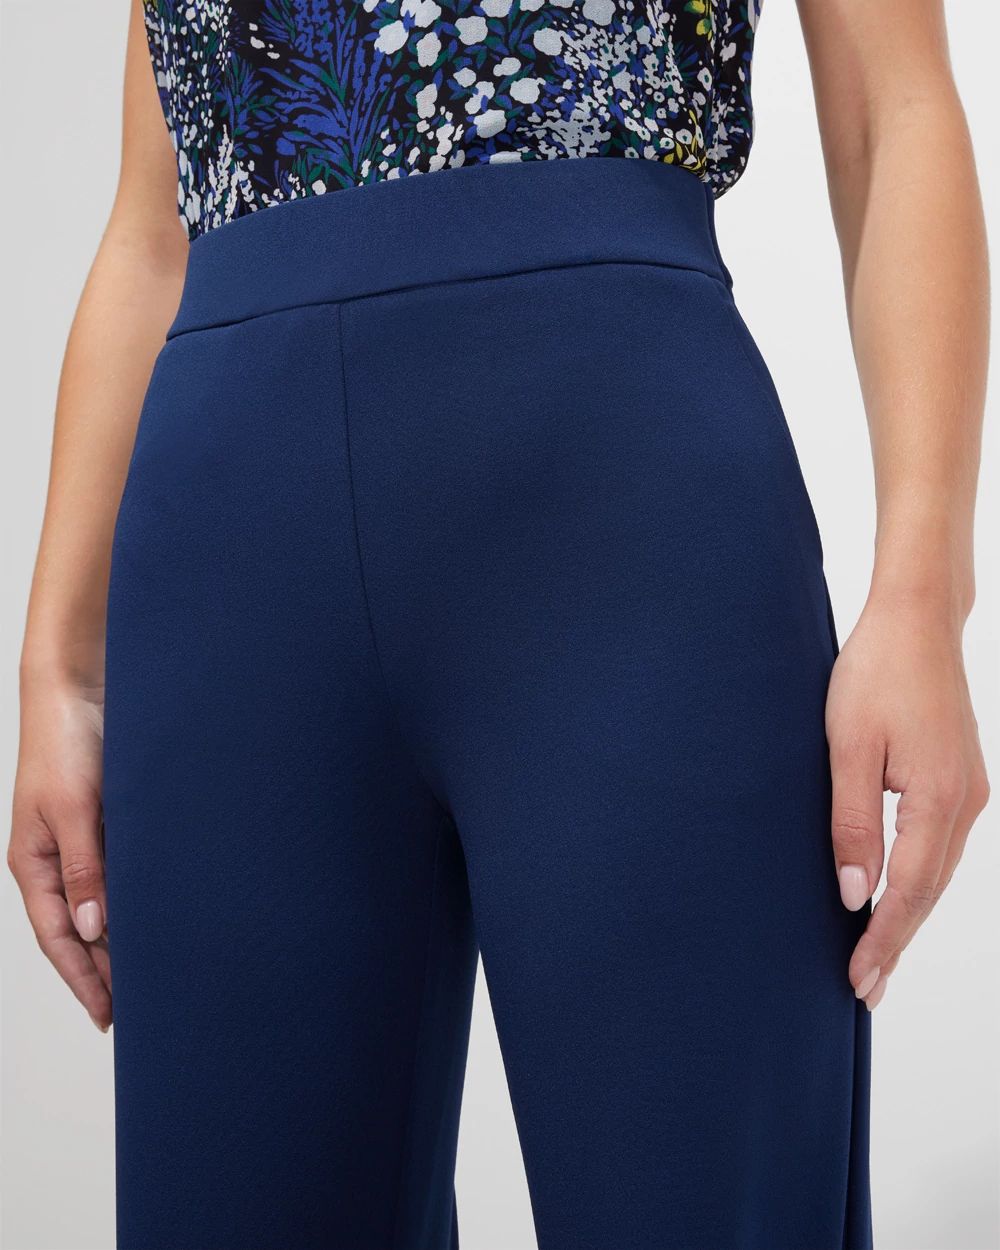 Outlet WHBM Pull-On Wide-Leg Pants click to view larger image.